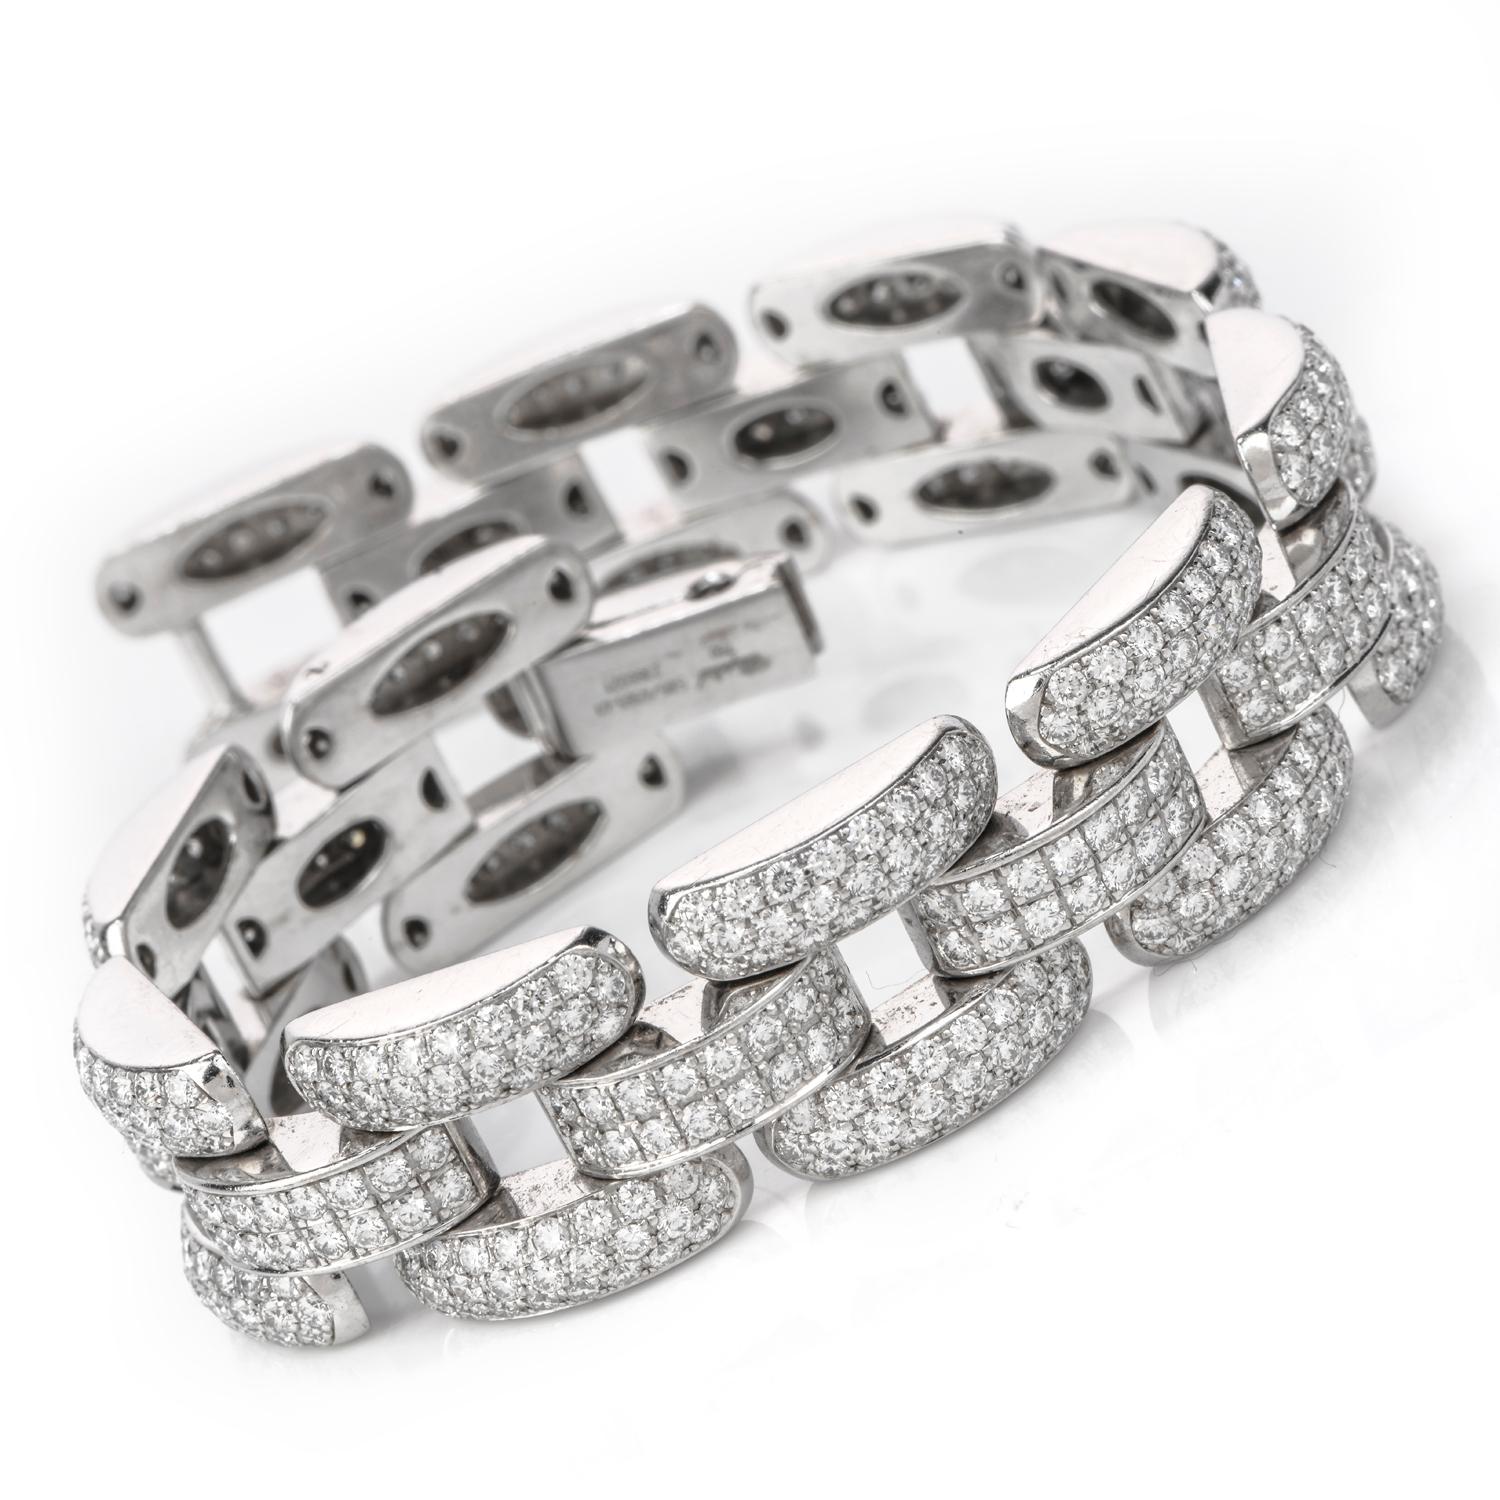 Decorate your wrist extravagantly with this impressive Chopard Diamond 18K White Gold 12ct Pave Link Bracelet.  This designer bracelet is crafted in 18 karat white gold and has approximately 720 icy white genuine diamonds of 12.00 carats,  F-G color